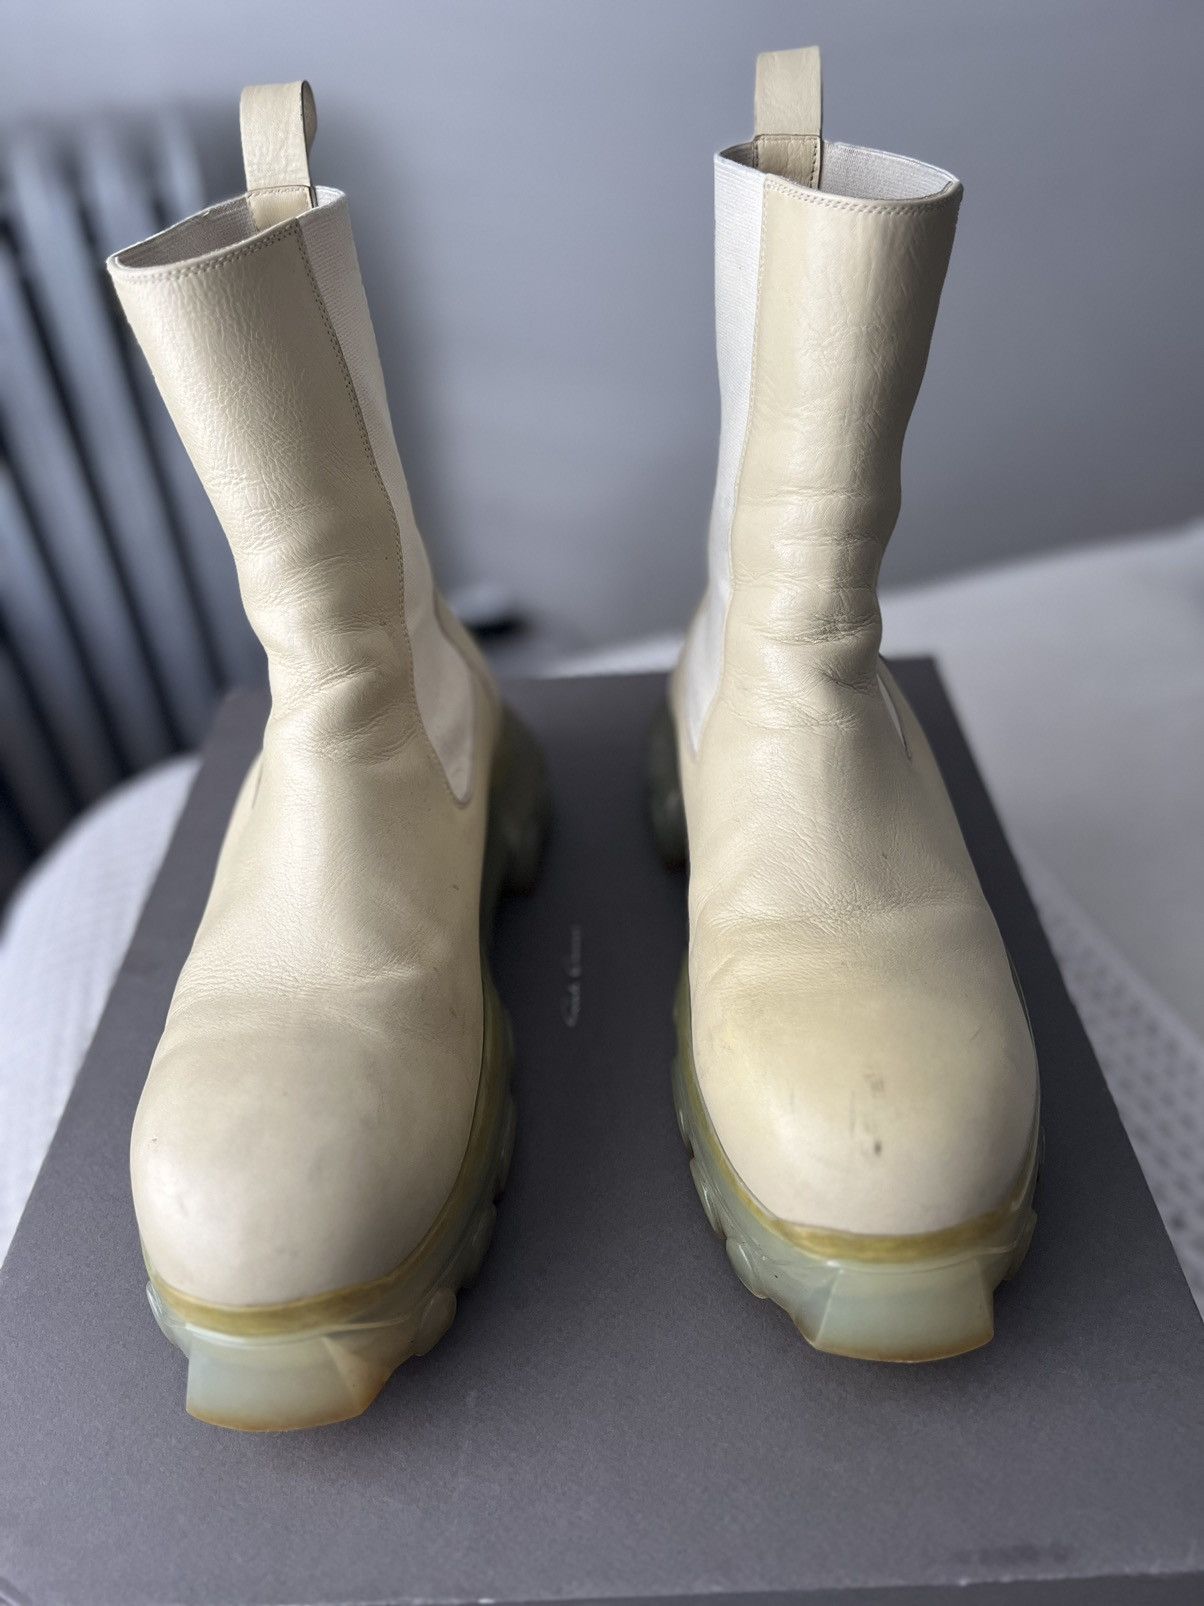 Rick Owens Rick Owens Beatle Bozo Tractor Boots | Grailed